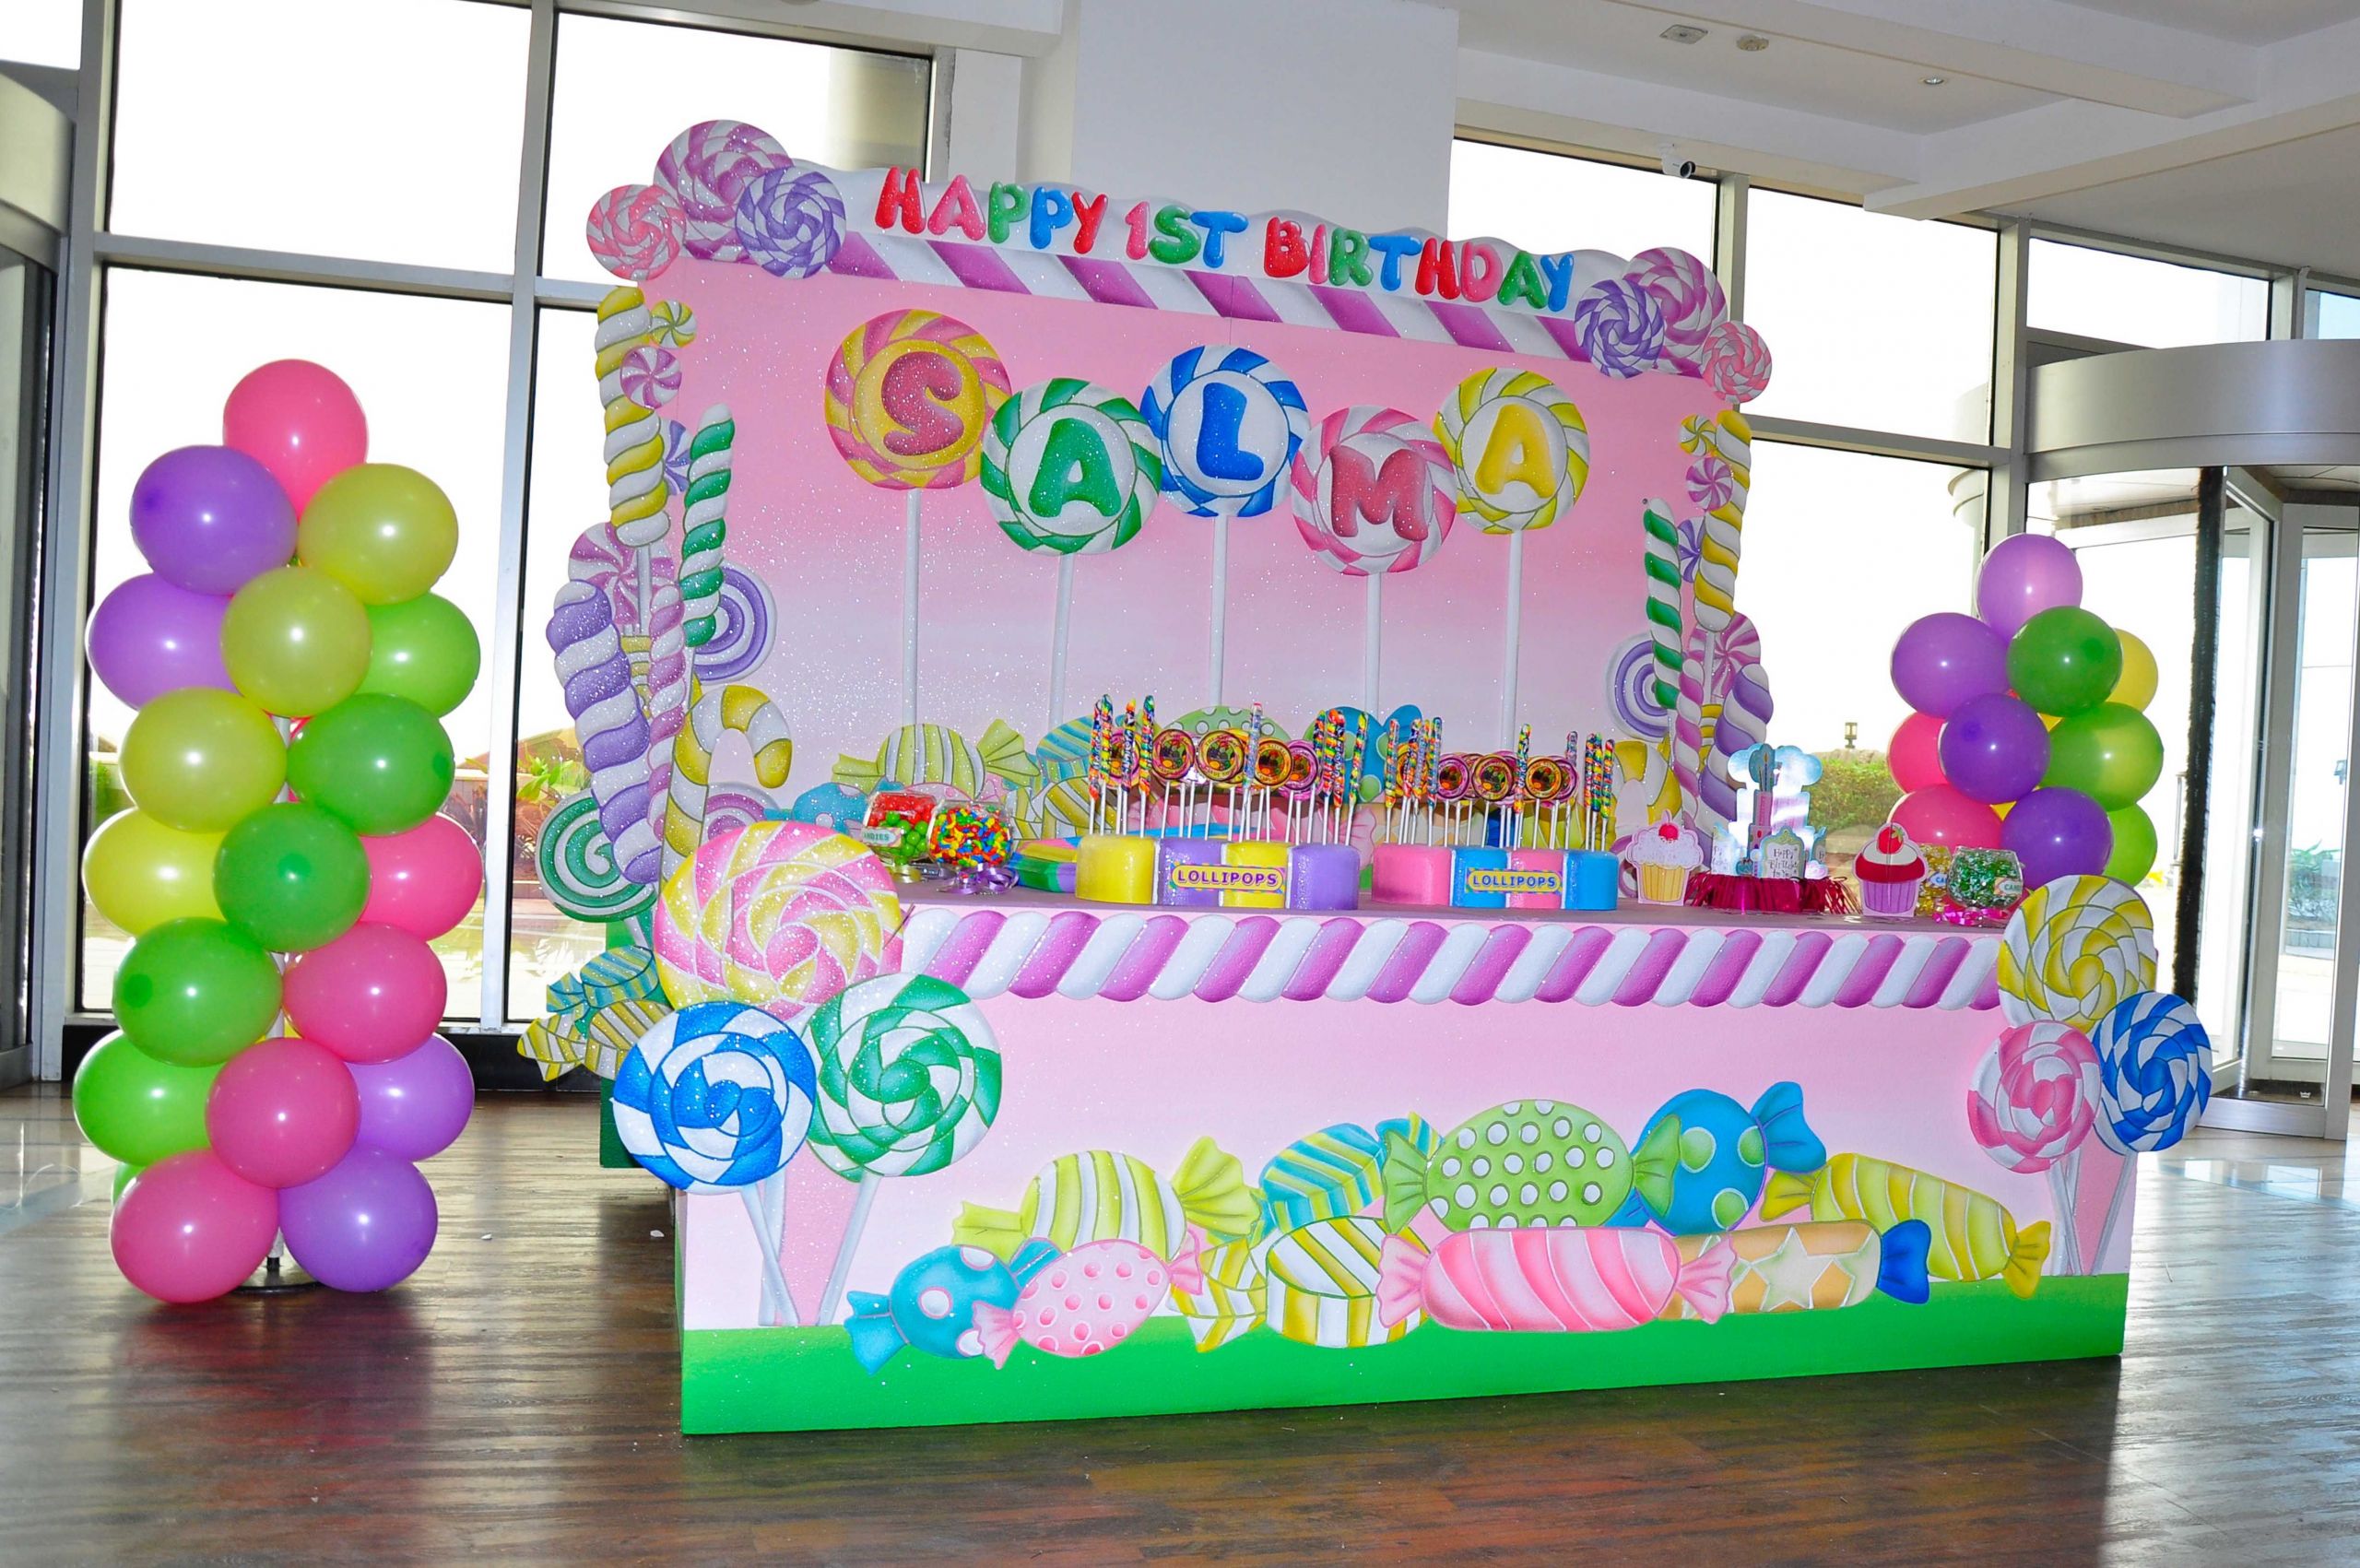 Candyland Birthday Decorations
 Candyland party decoration by fantasyparty